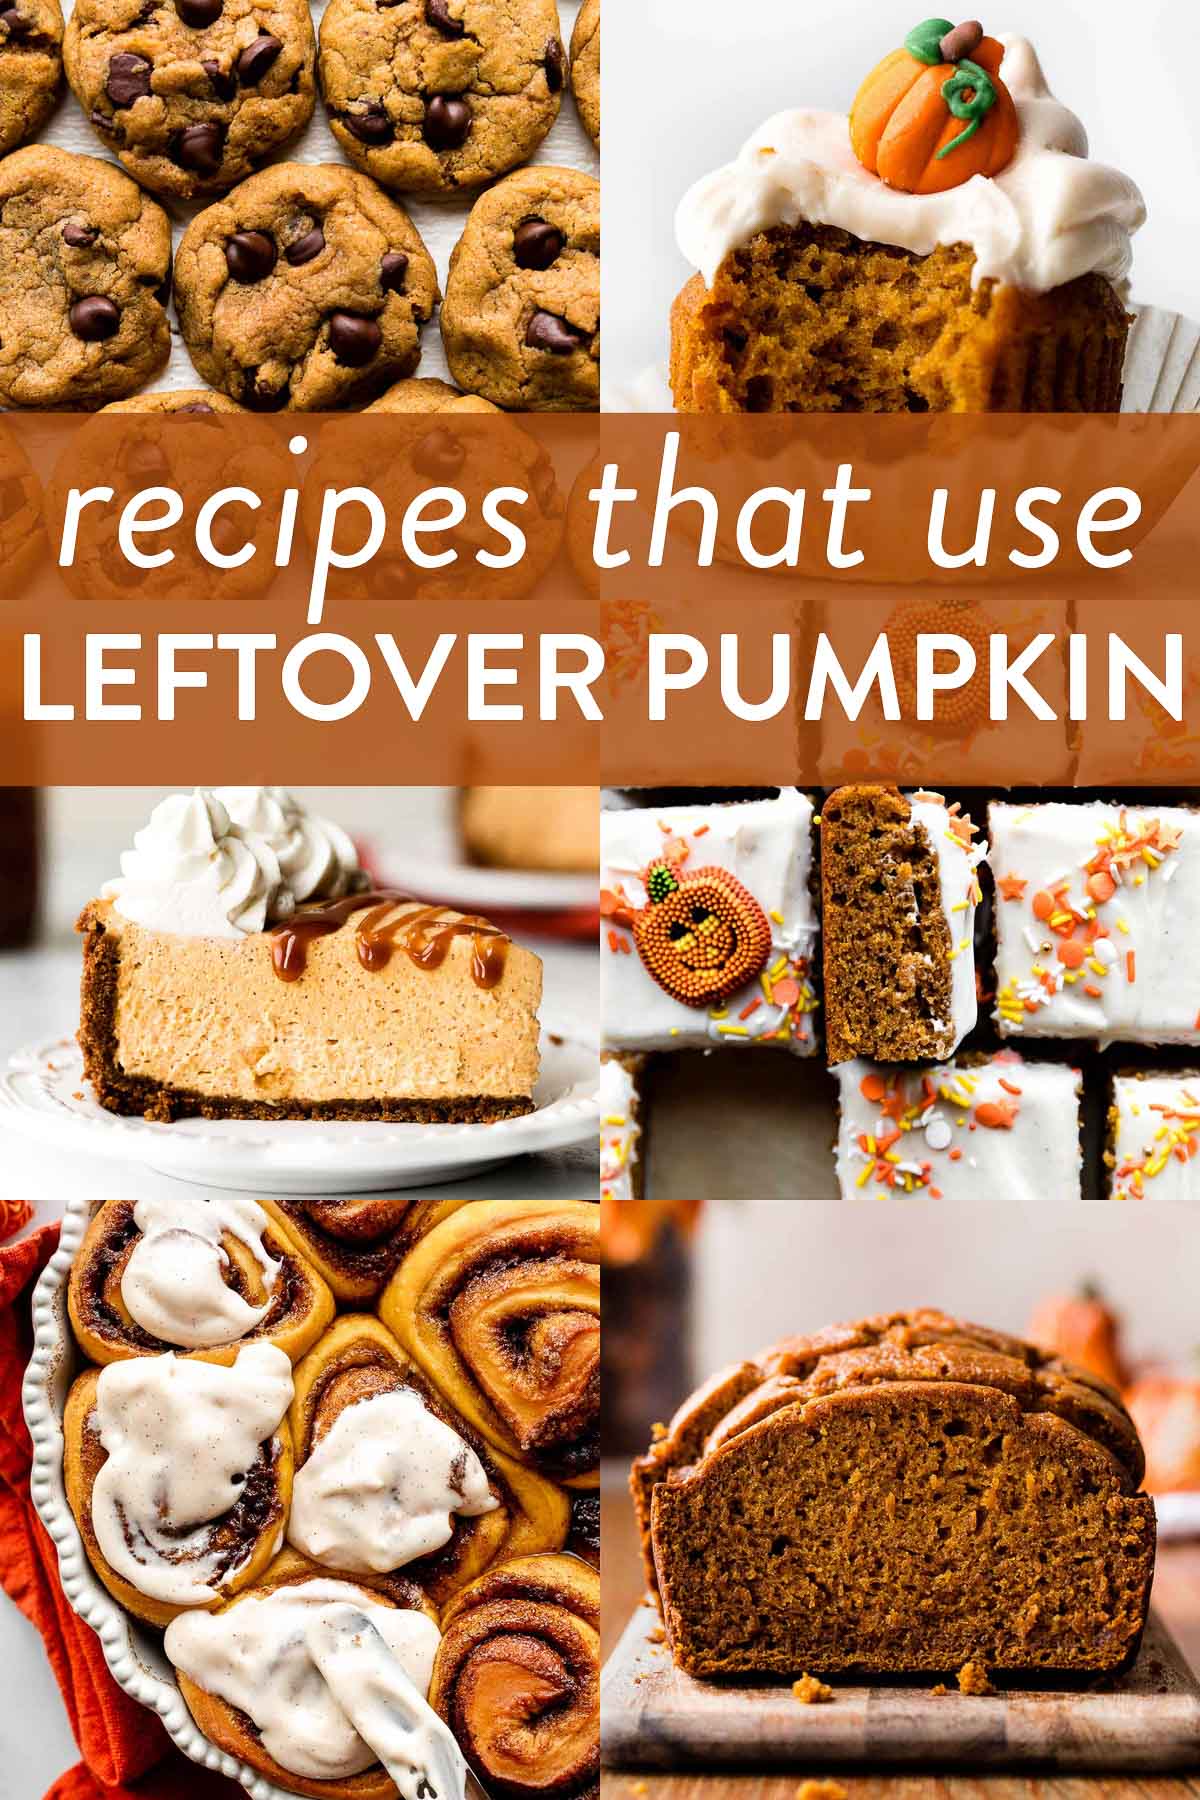 collage of pumpkin recipe photos including pumpkin cupcakes, pumpkin cheesecake, pumpkin bread, and pumpkin cookies with the text recipes that use leftover pumpkin overlayed.